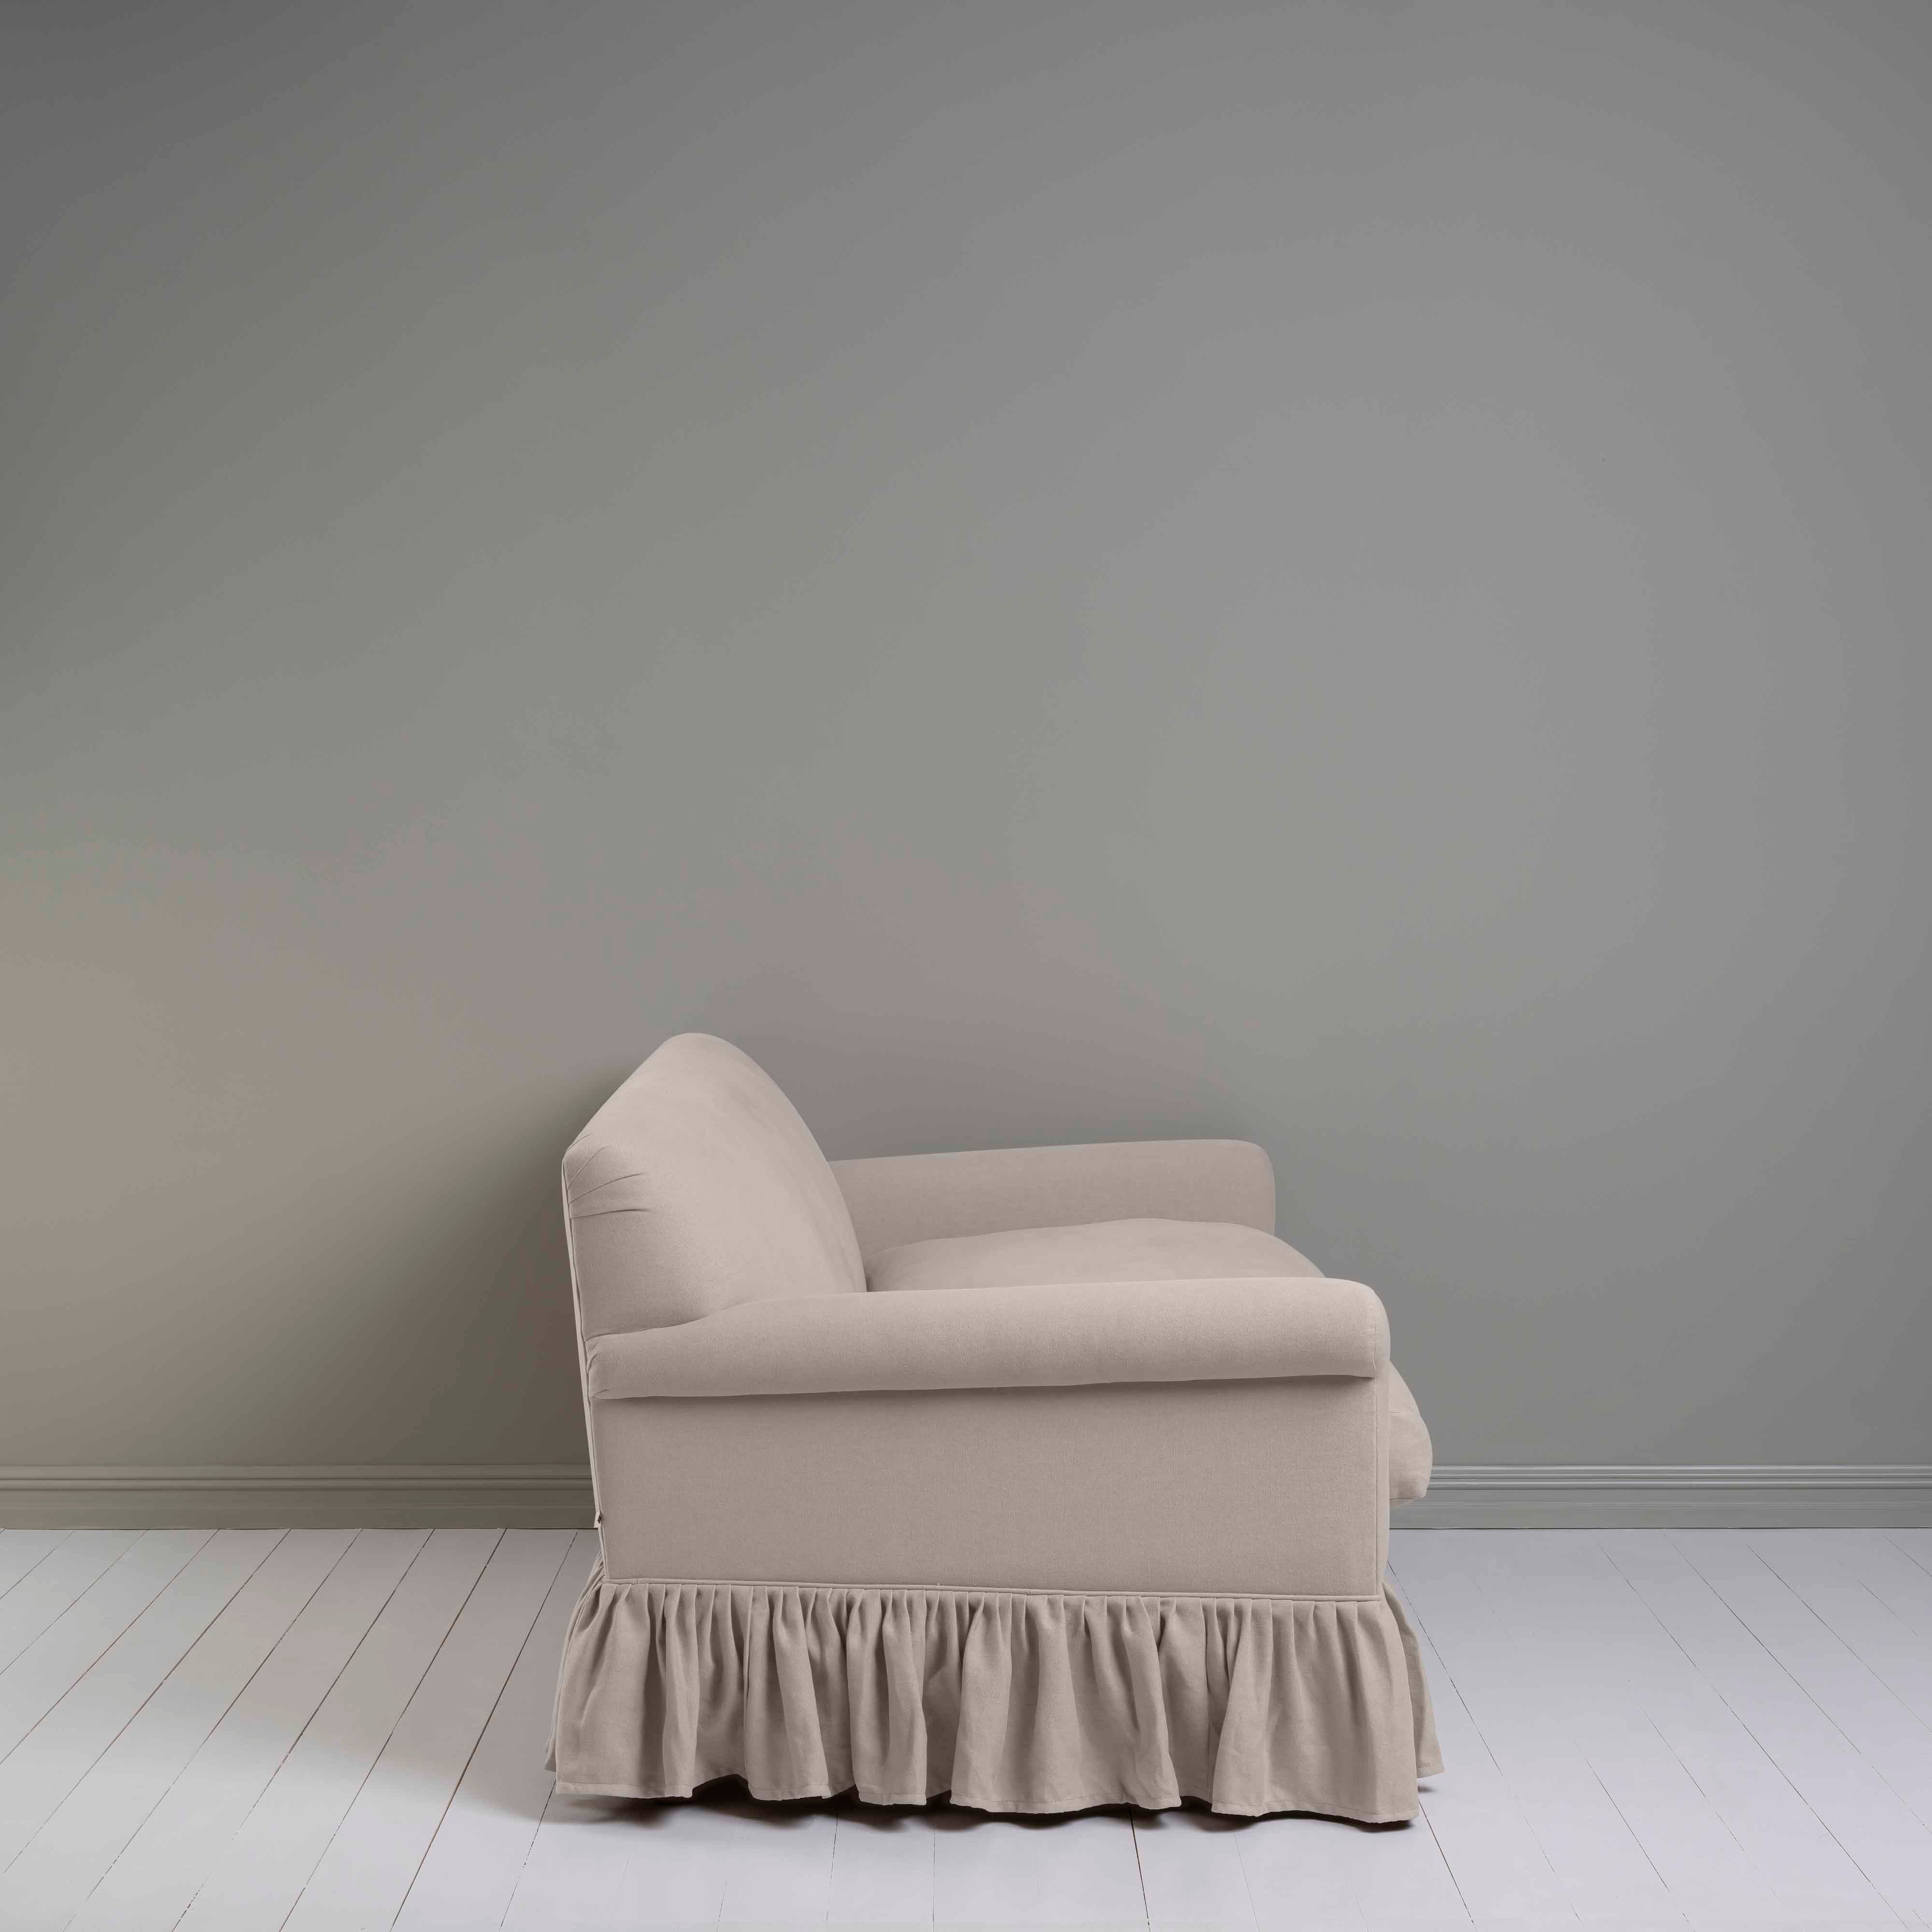  Curtain Call 3 Seater Sofa in Laidback Linen Pearl Grey 